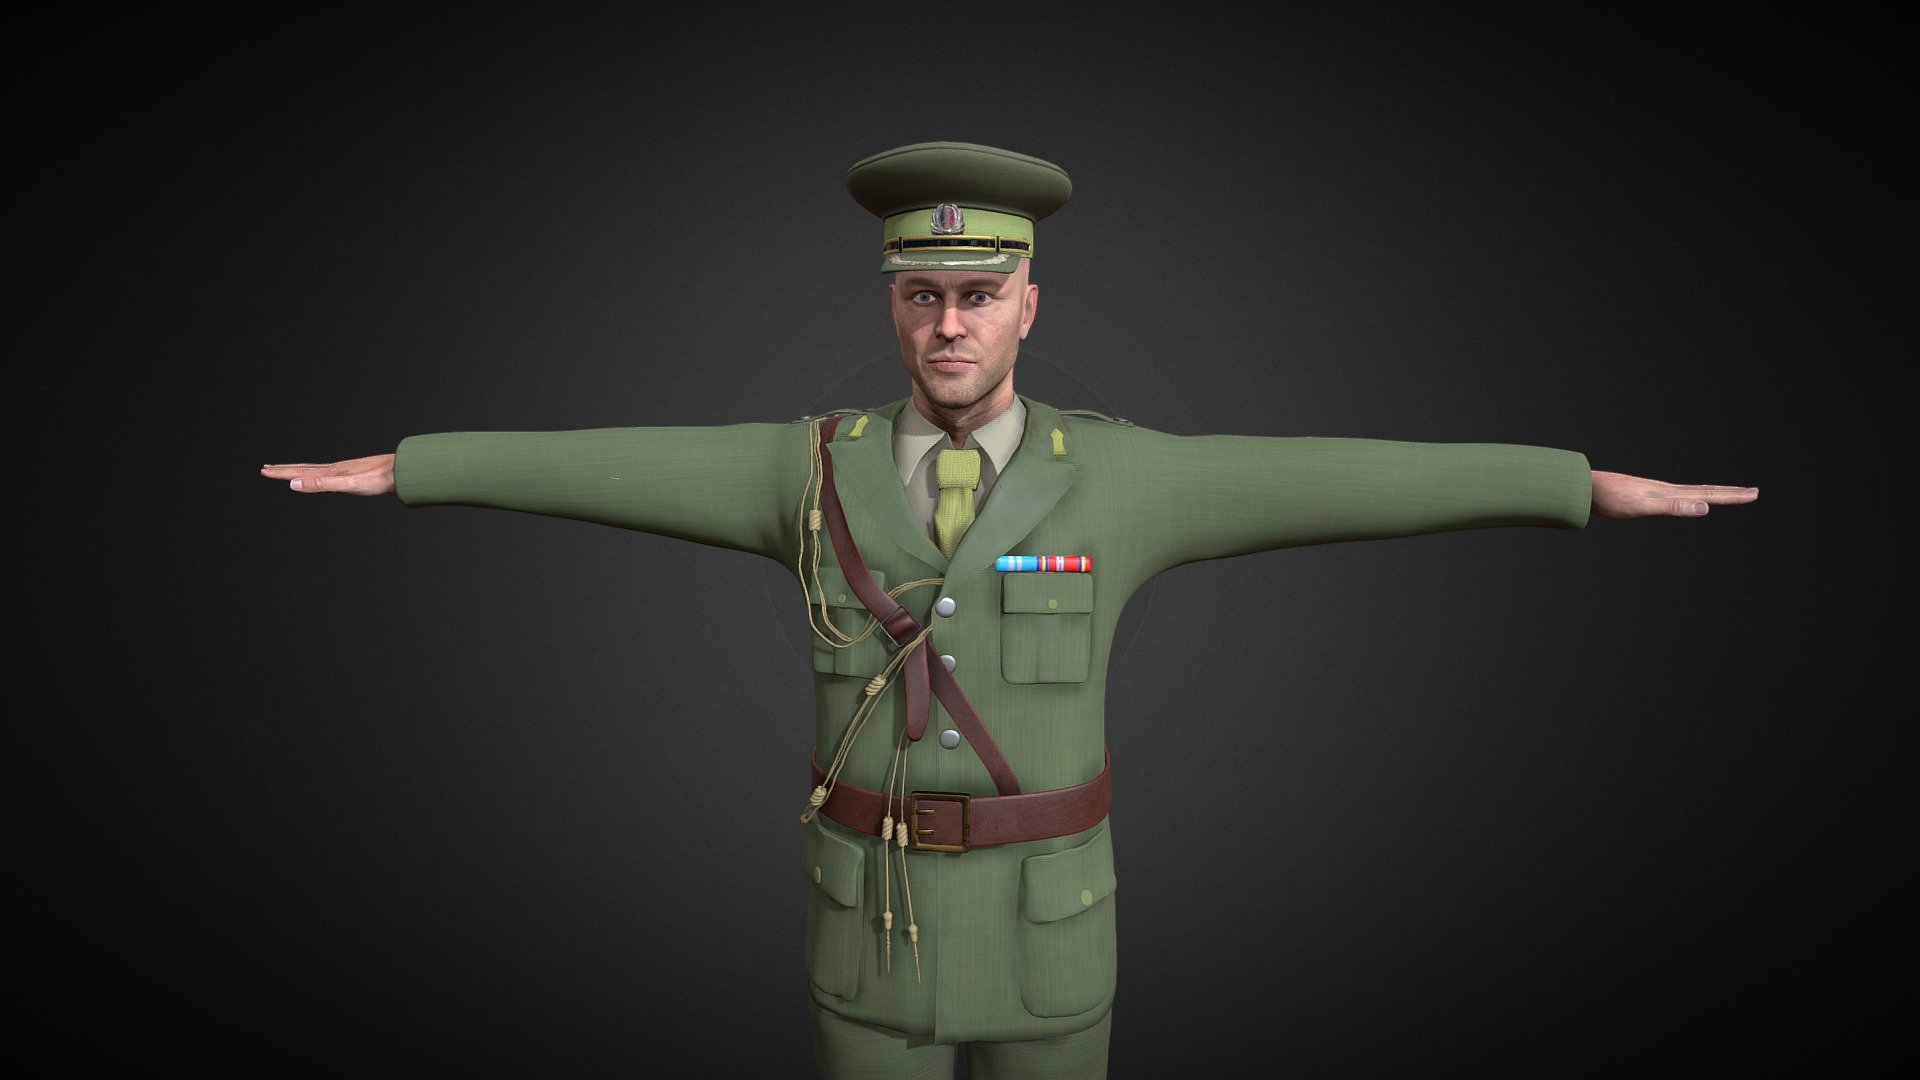 This is a roumanian ww2 general uniform made in blender and textured in substance painter. The character was exported from iclone 8 to sustain the proportion and to present the assets 3d model